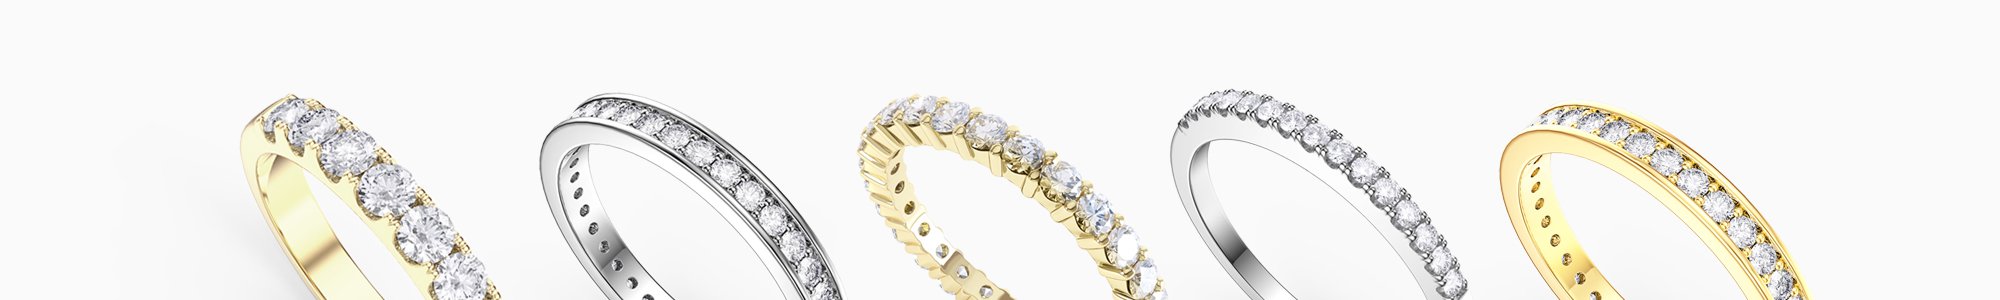 Shop Wedding Rings by Jian London.  Buy direct and save from our wide selection of wedding rings at the Jian London Jewelry Store. Free US Delivery